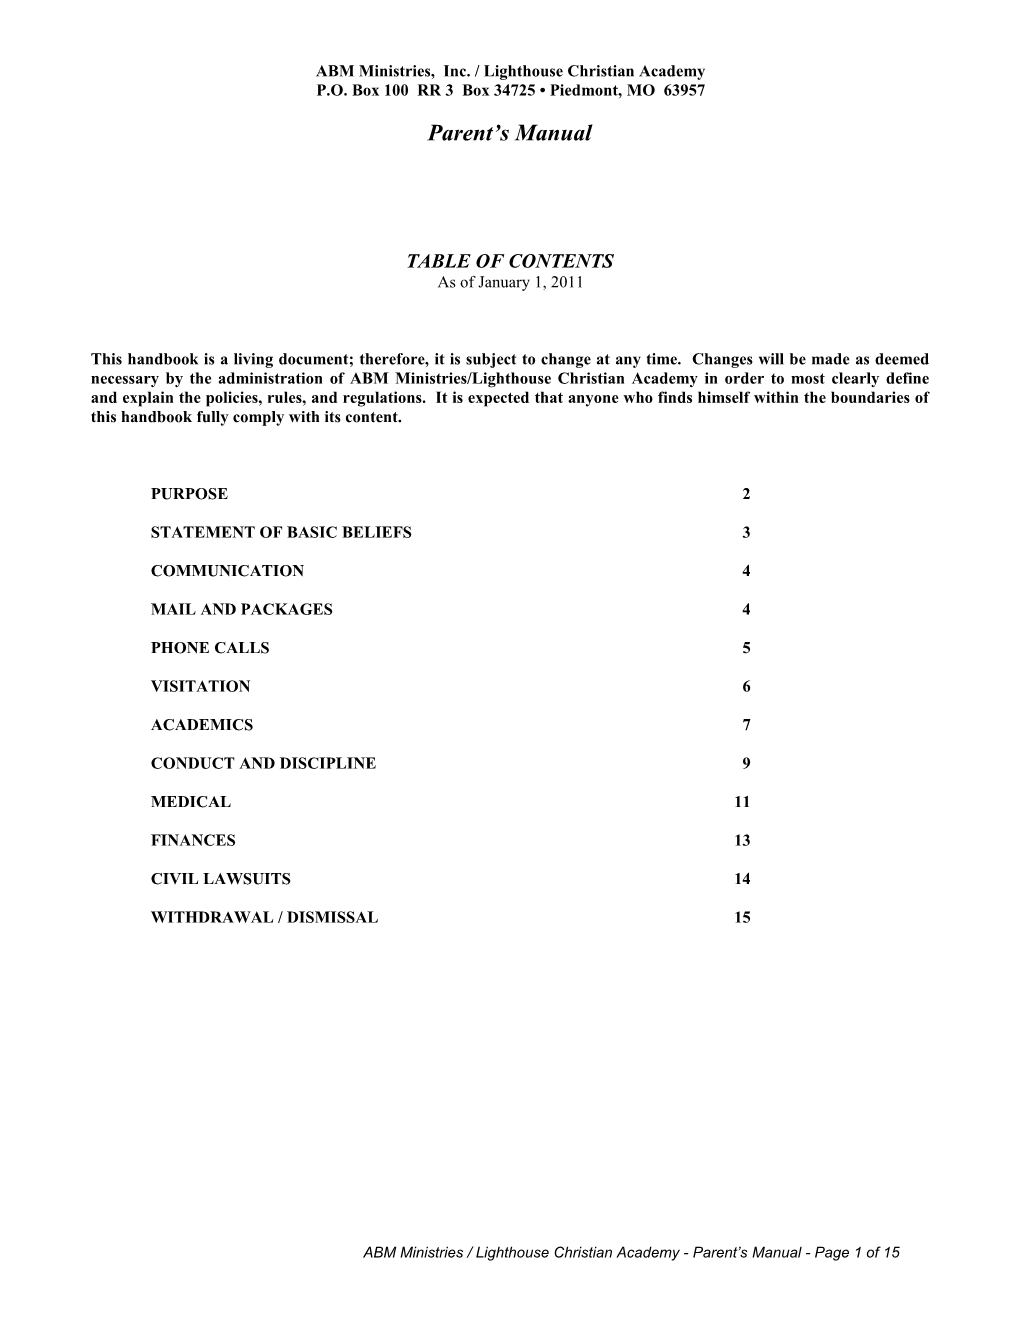 Table of Contents s372